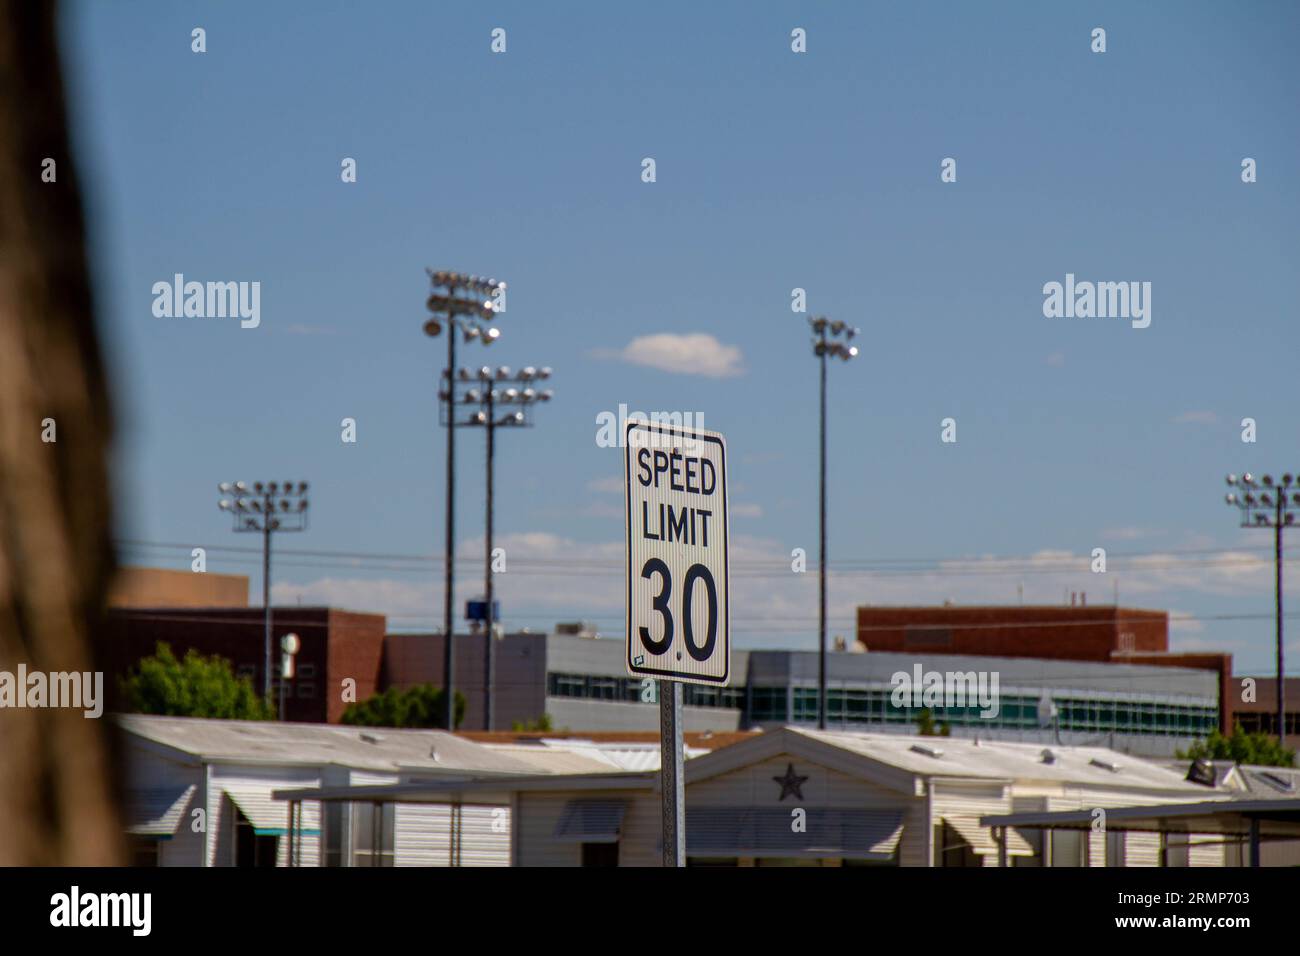 A photo of a speed limit sign on an urban road Stock Photo